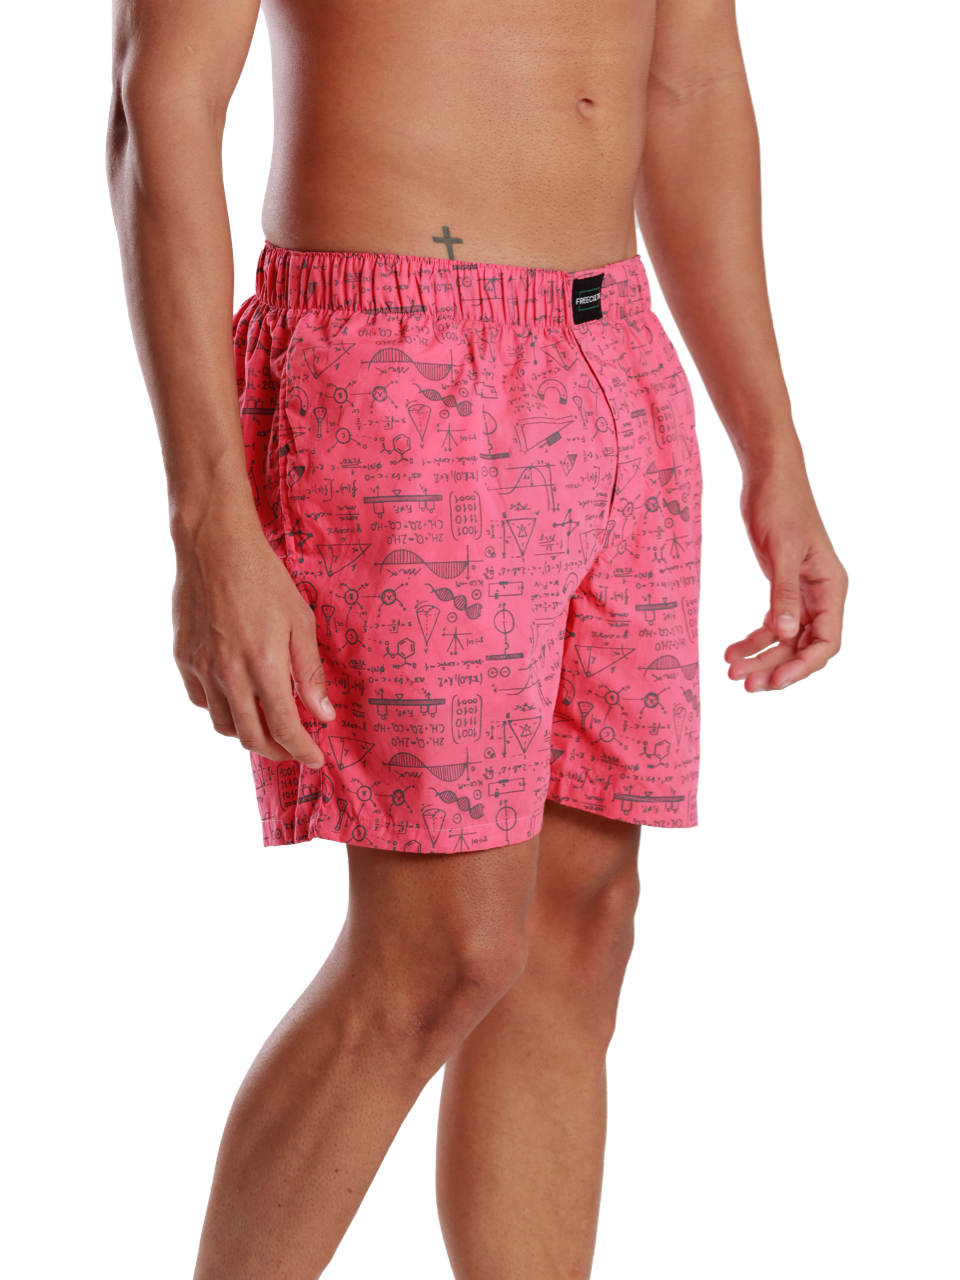 All-Day Boxer Shorts Plain & Printed - (Pack of 3)